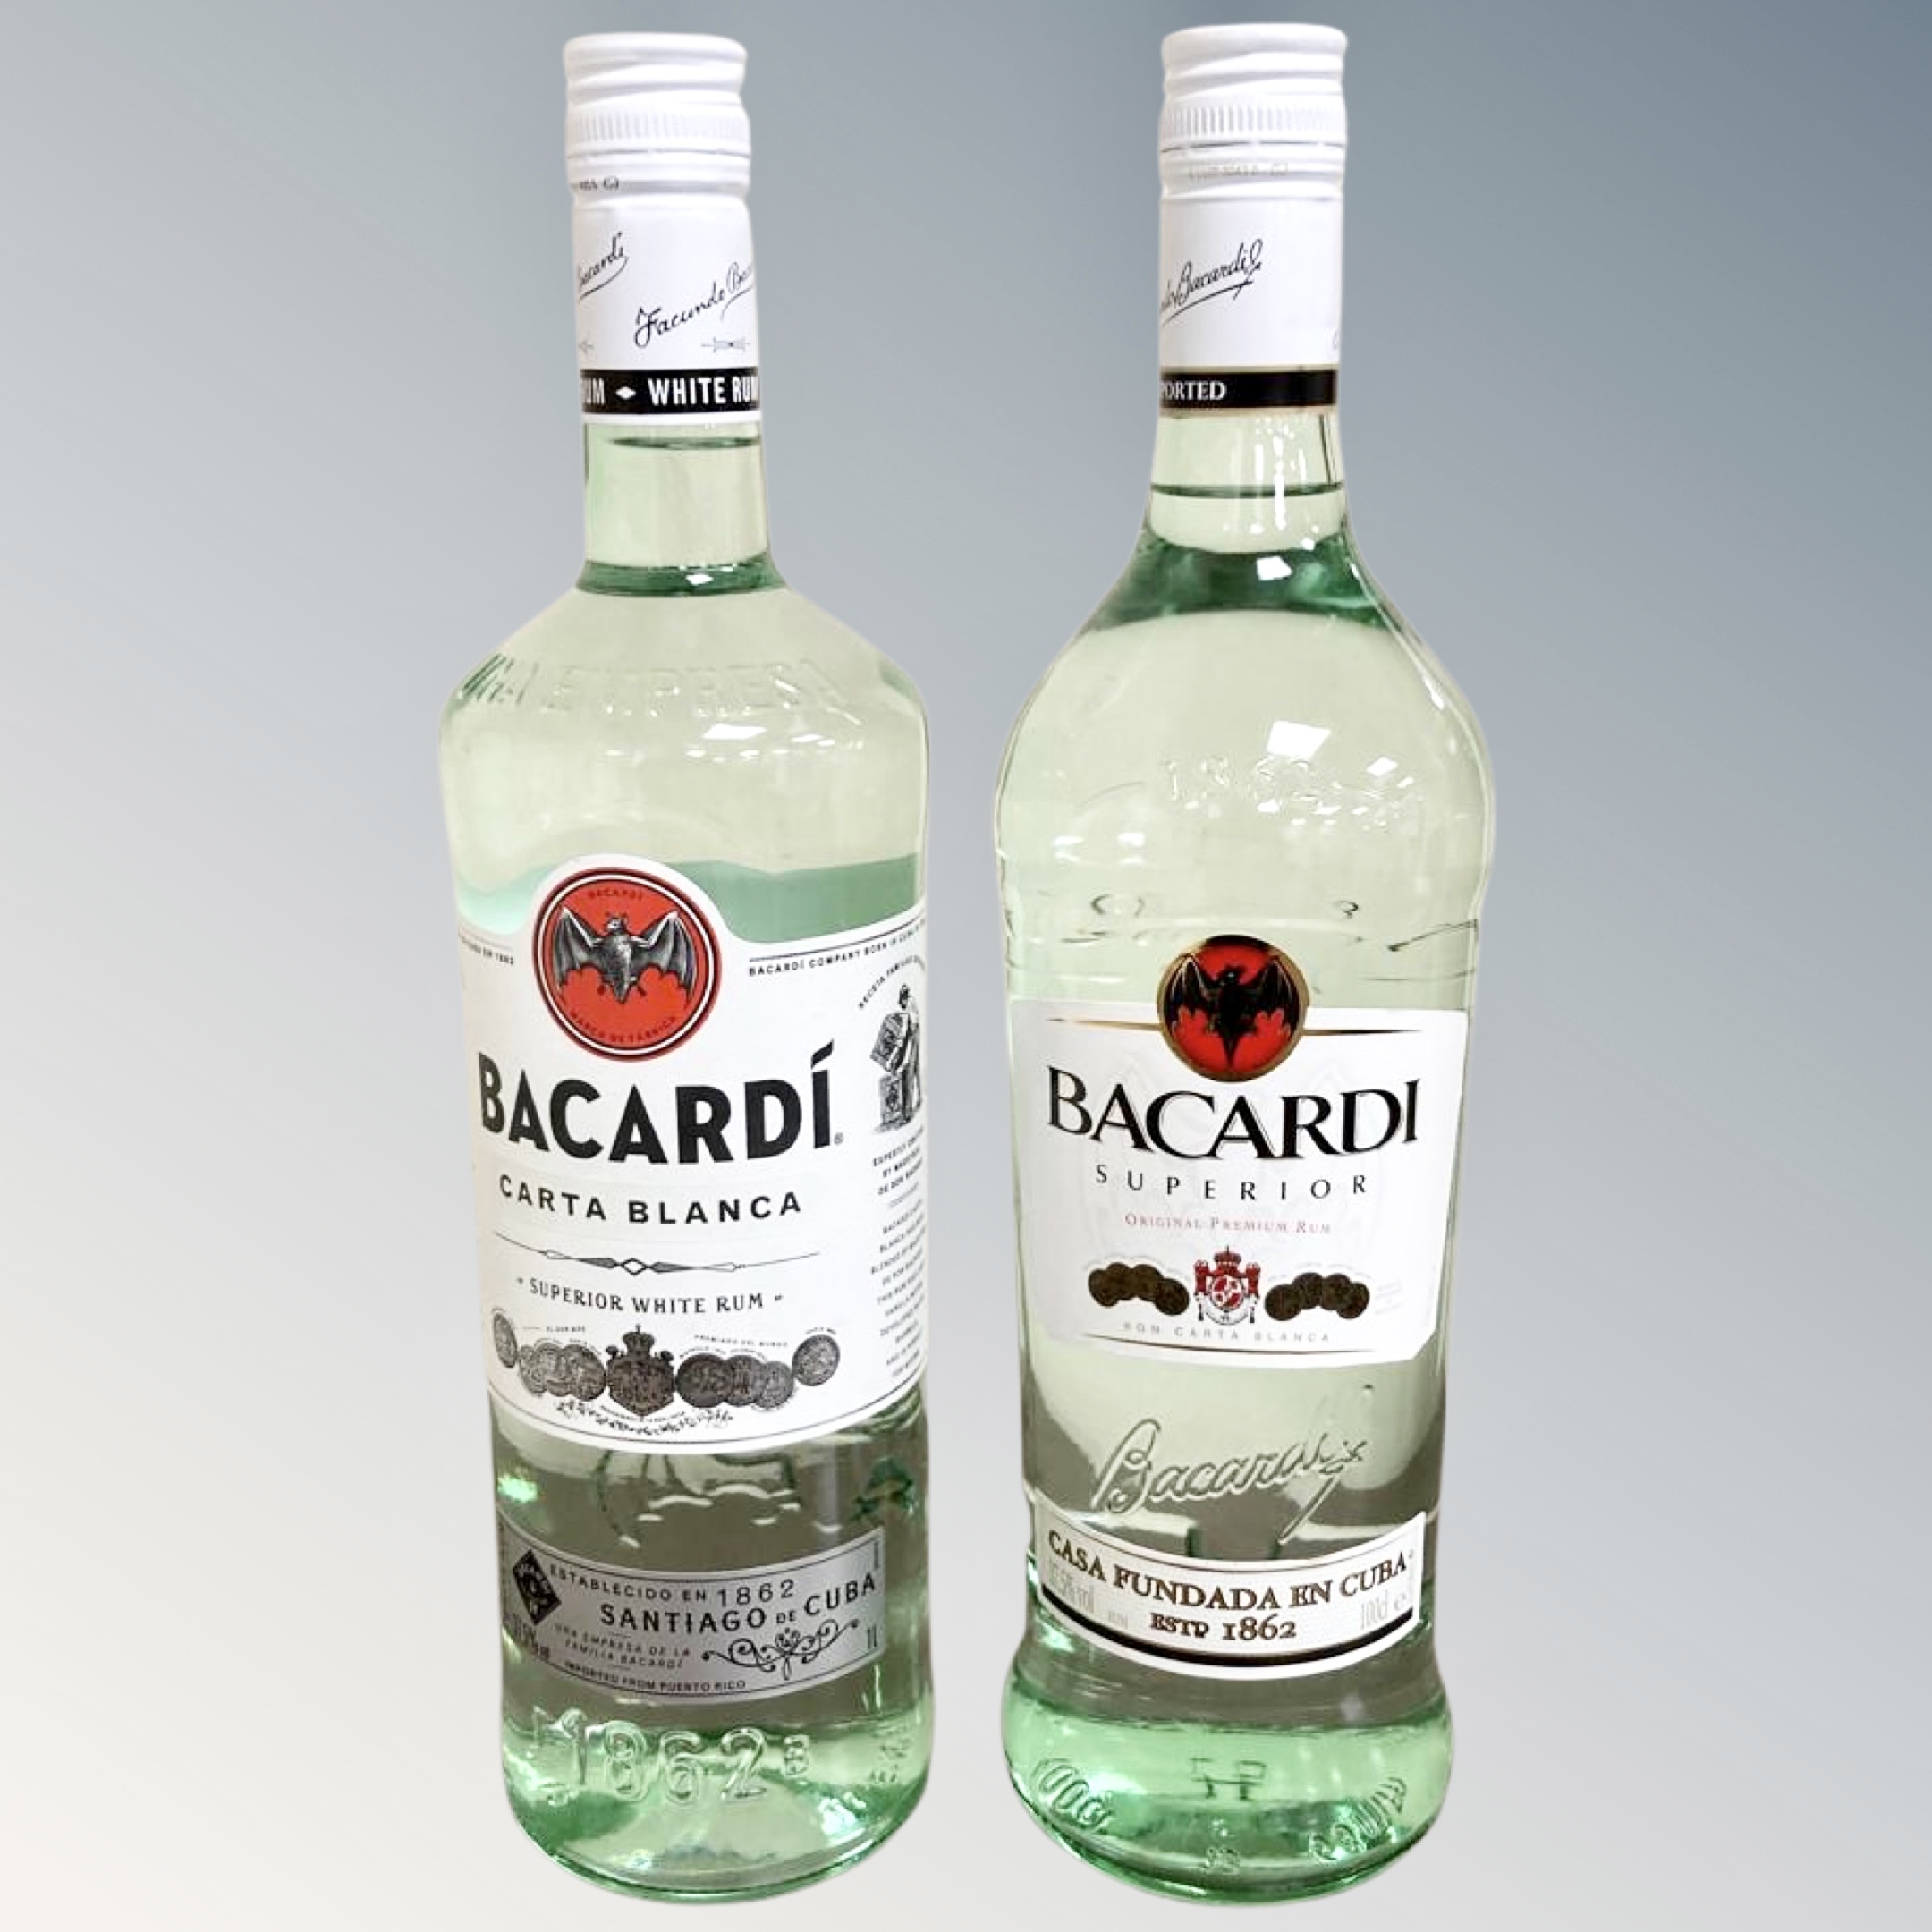 Two bottles of Bacardi superior white rum 1 litre.